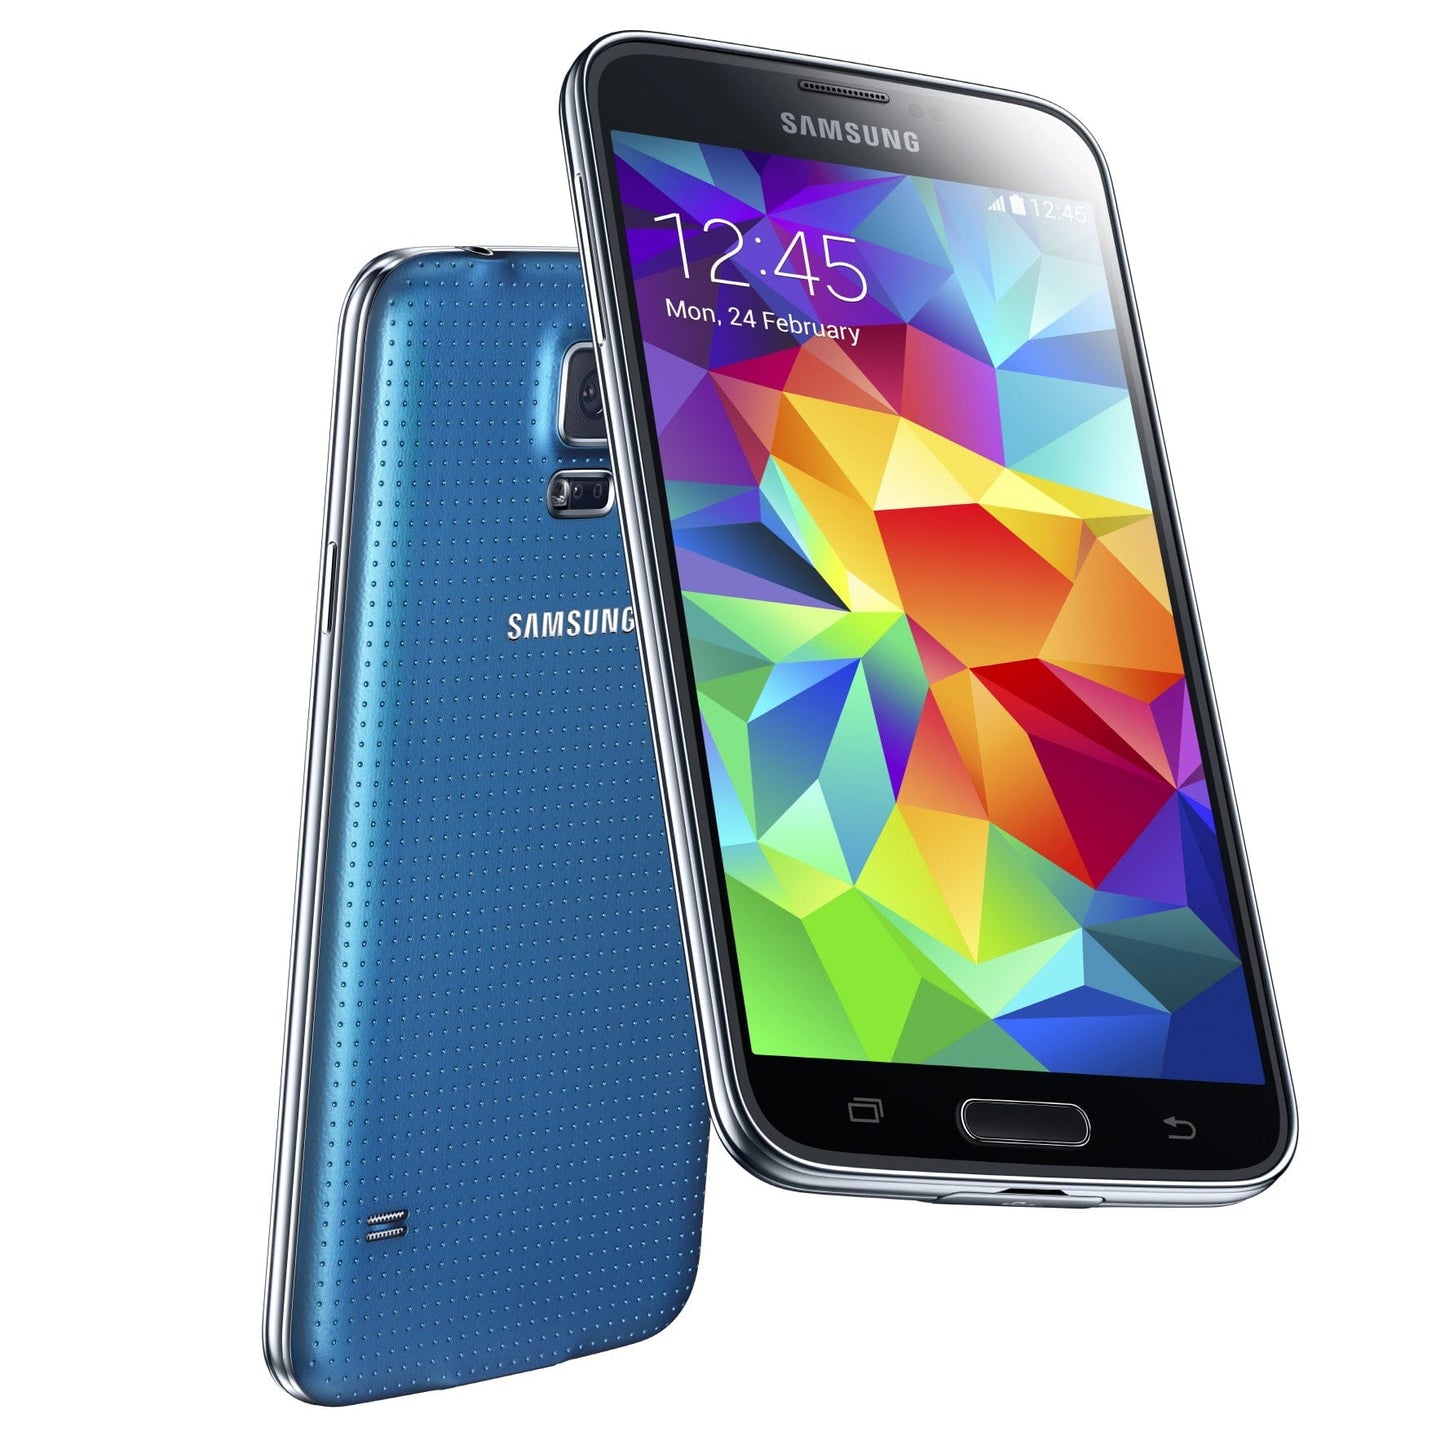 Samsung Galaxy S5 Android Cell-Phone - Electric Blue- Unlocked